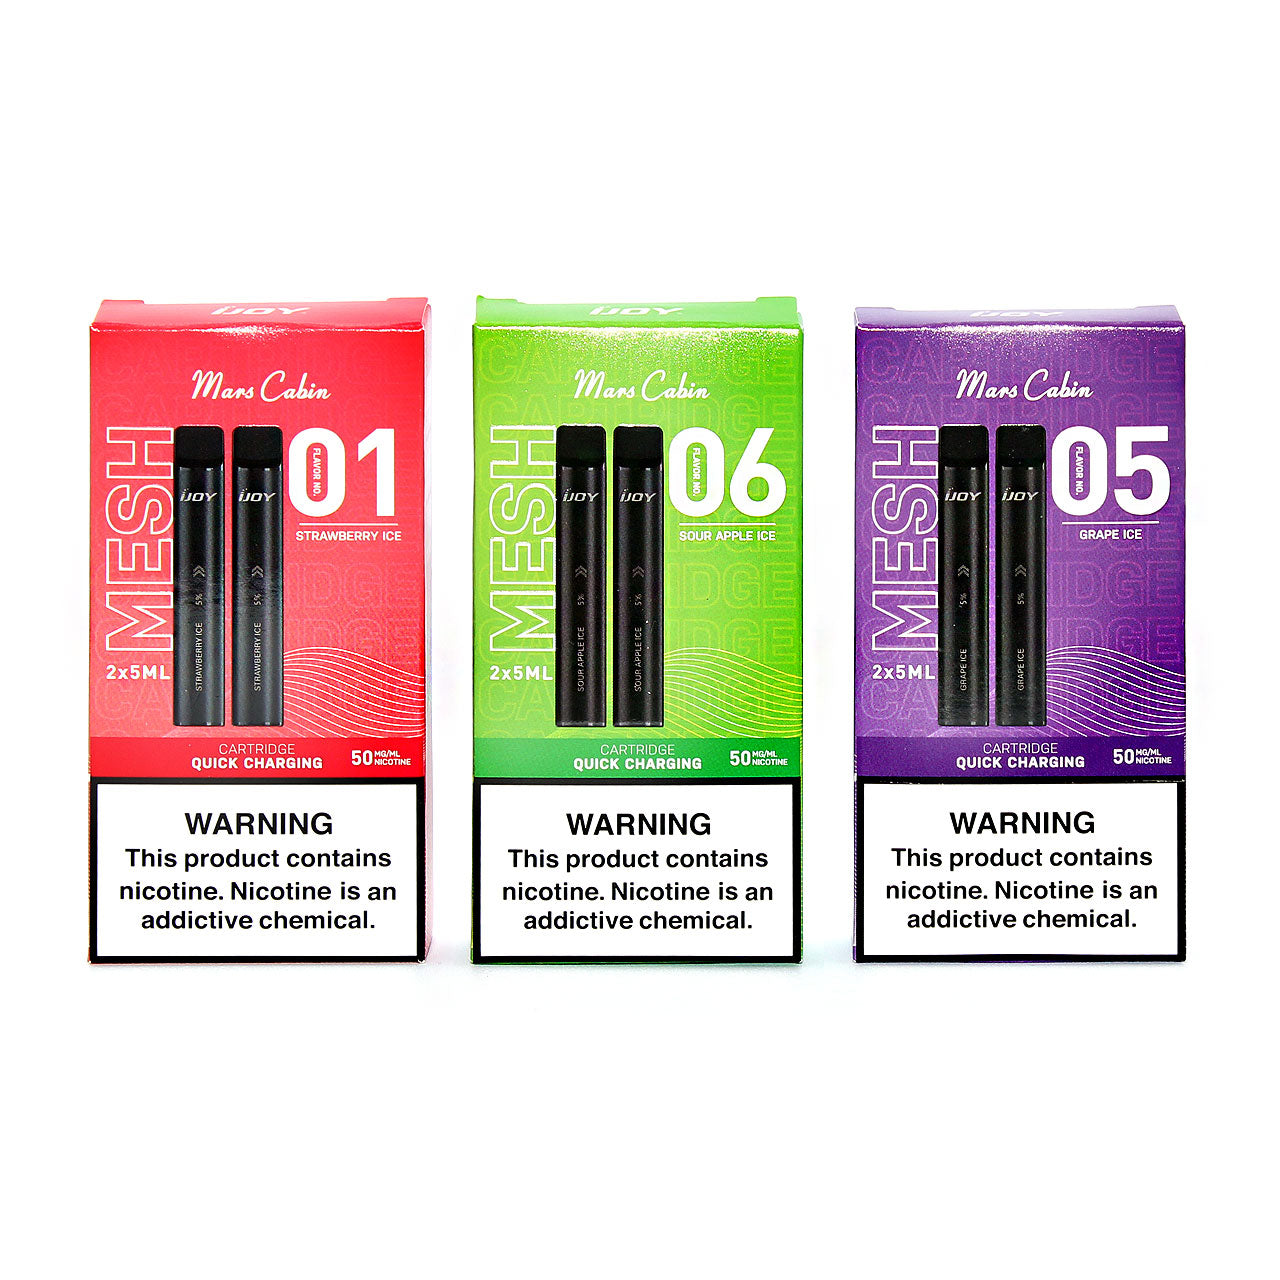 iJoy Mars Cabin 6000 Vape Disposable Pack of 2